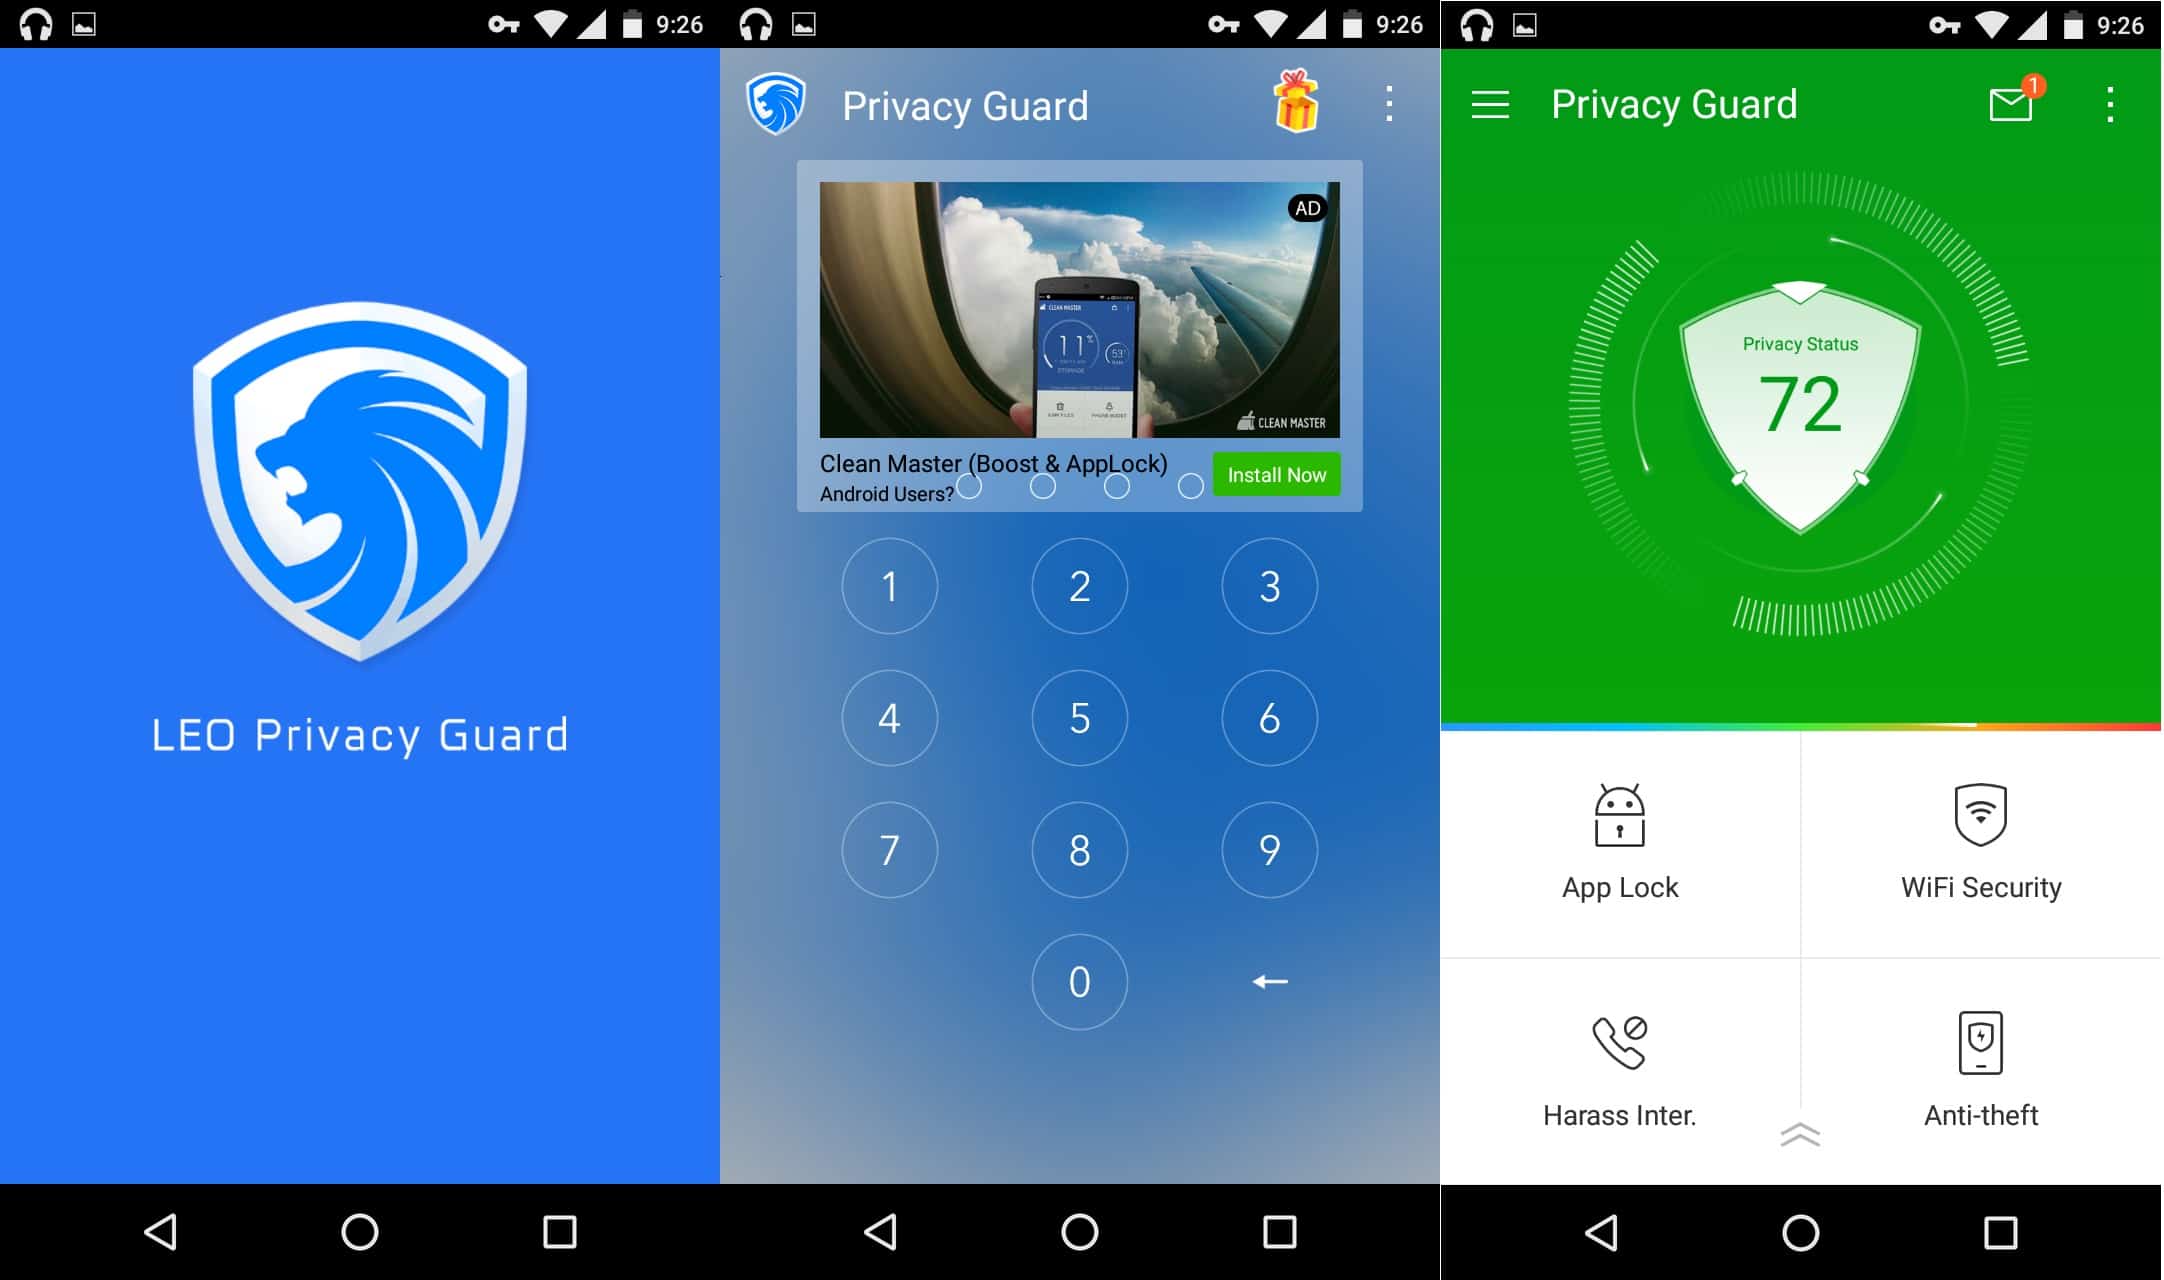 Best Privacy App - Leo Privacy Guard App for Android - Best Privacy App for Android